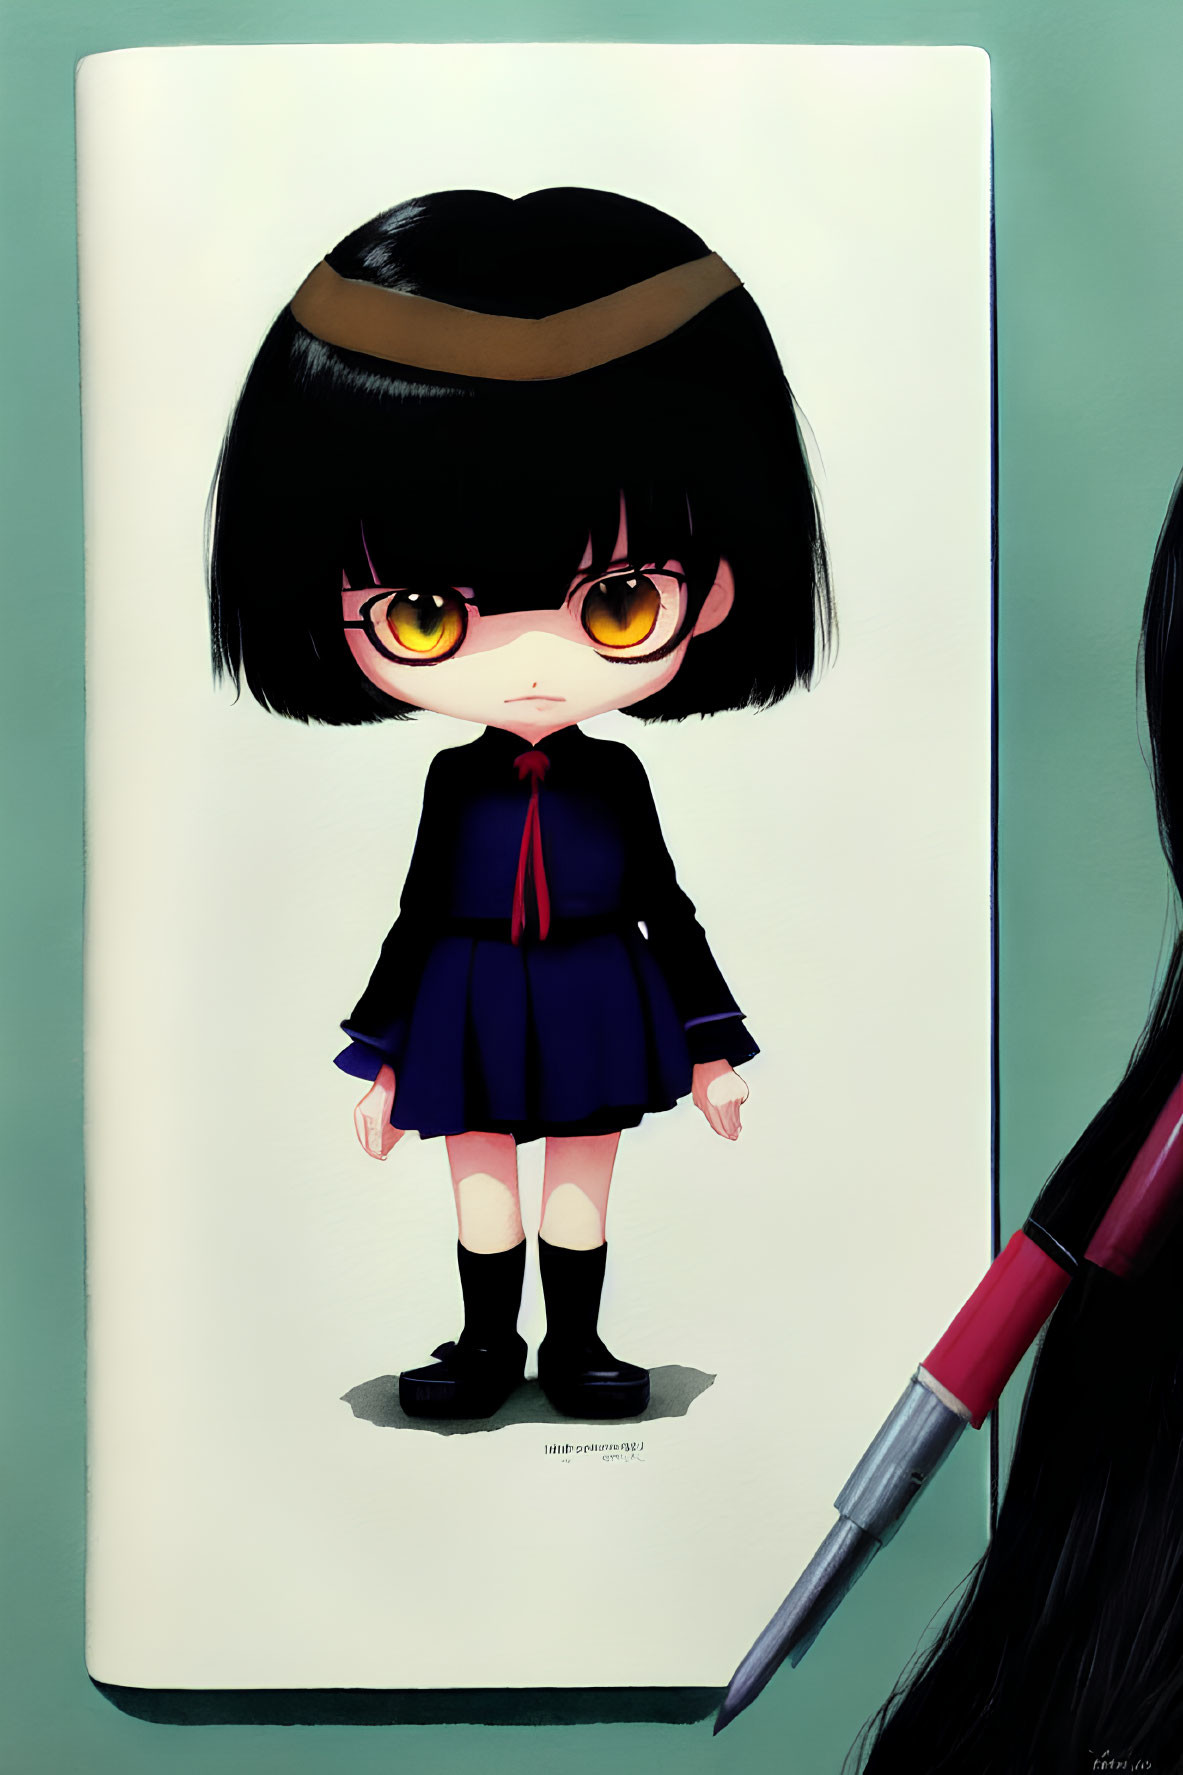 Stylized girl illustration with large eyes and black hairclip